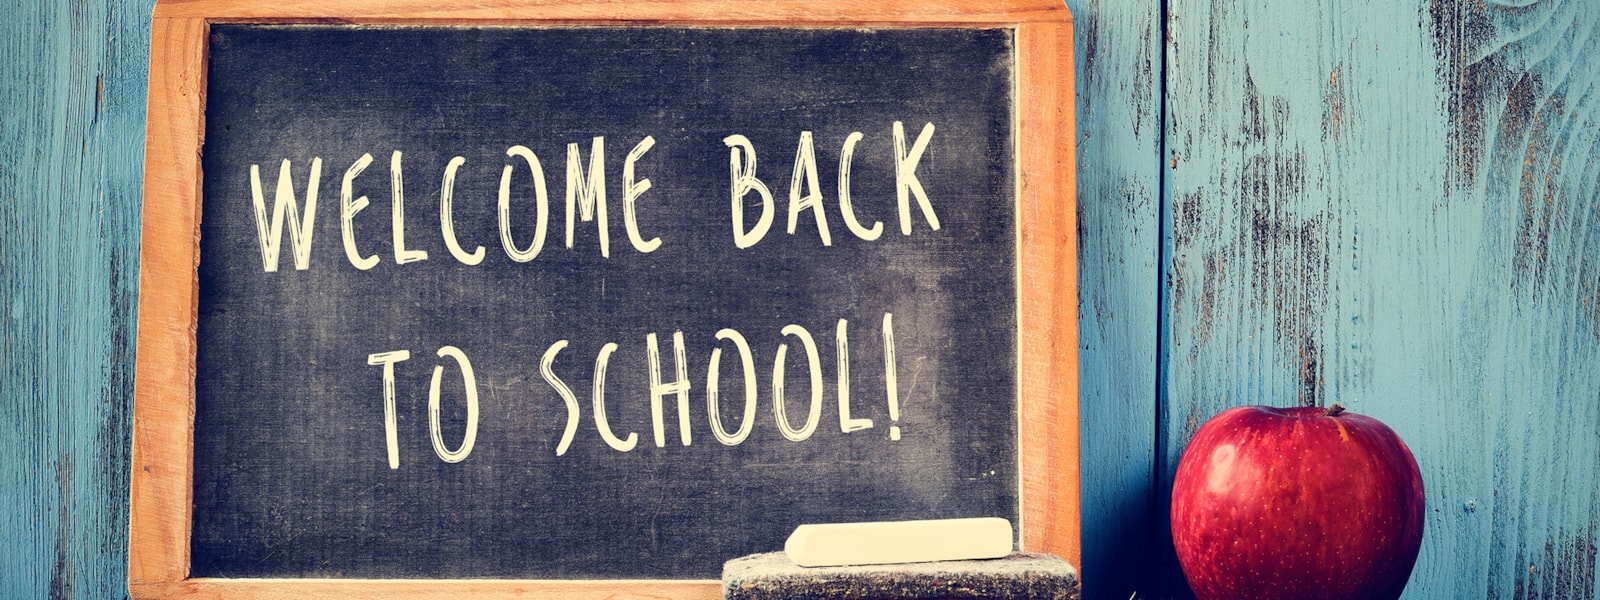 welcome back to school sign with apple 